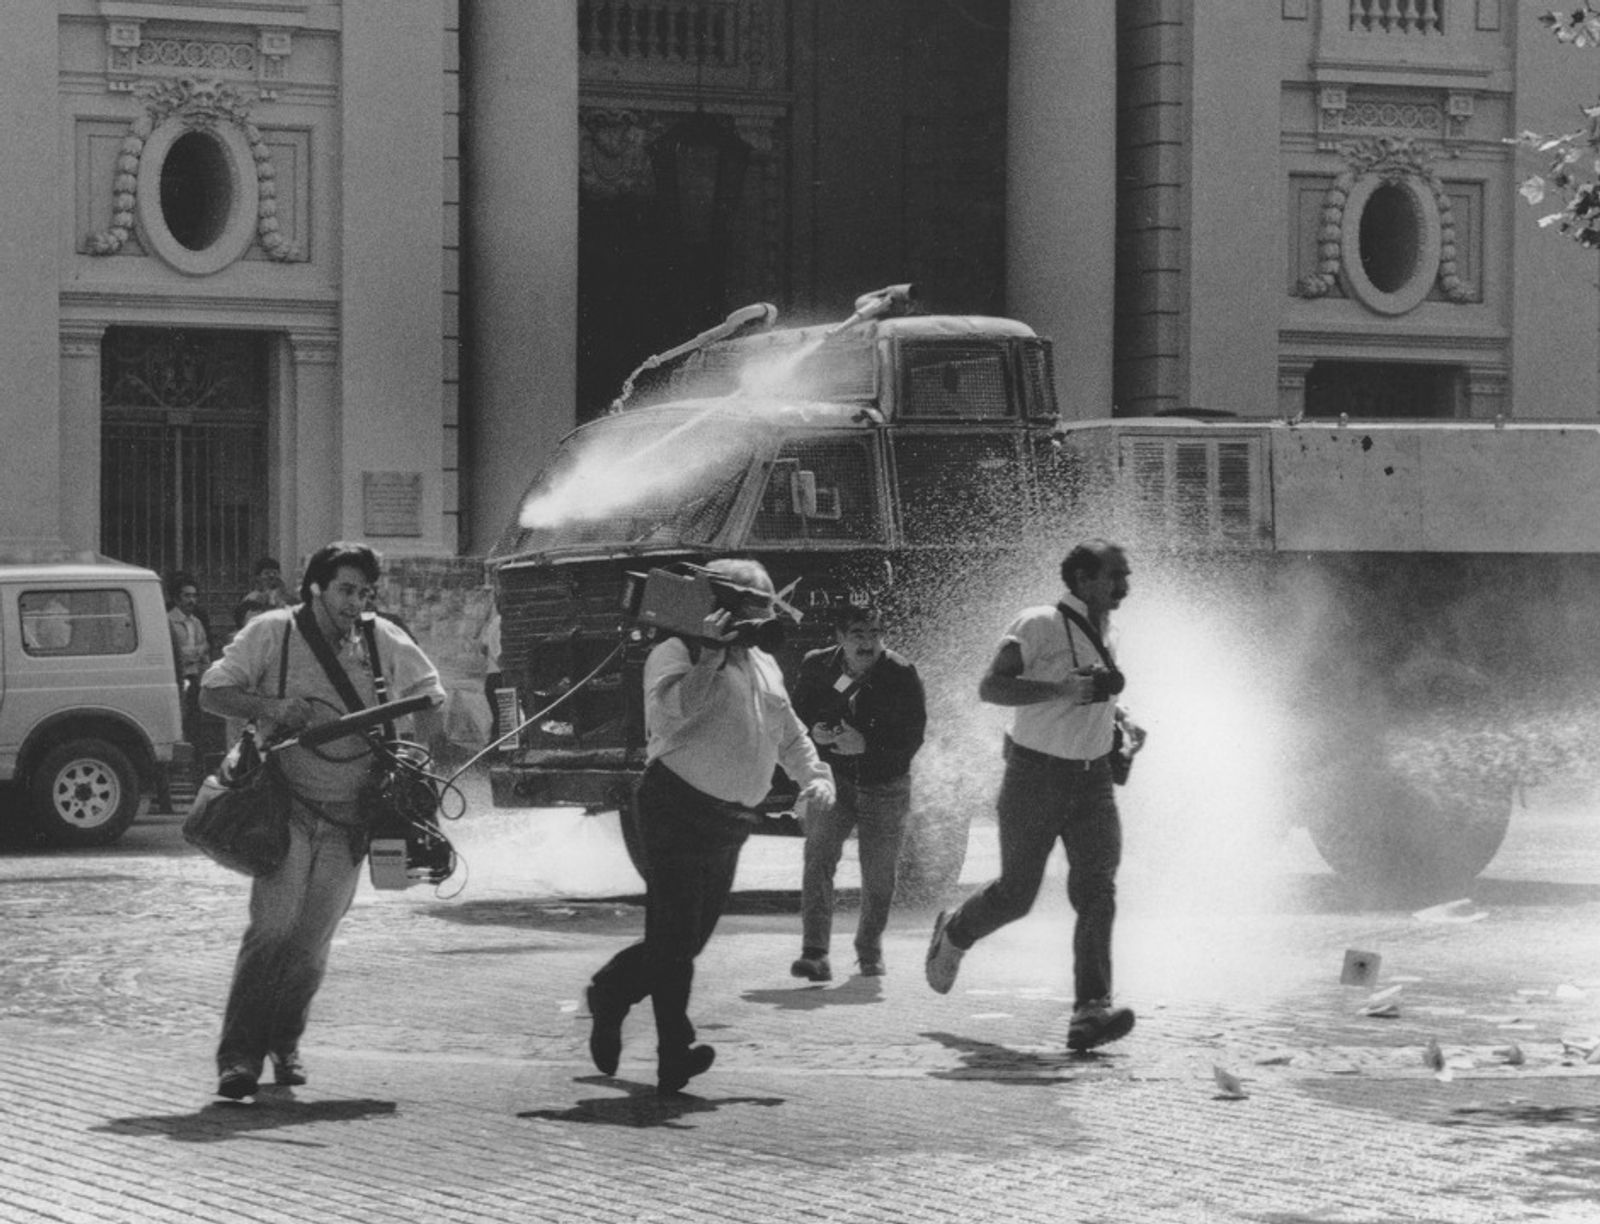 © Julio Etchart - Journalists attacked by water-cannon during the 'NO' referendum campaign against Pinochet in 1988. Santiago, Chile,